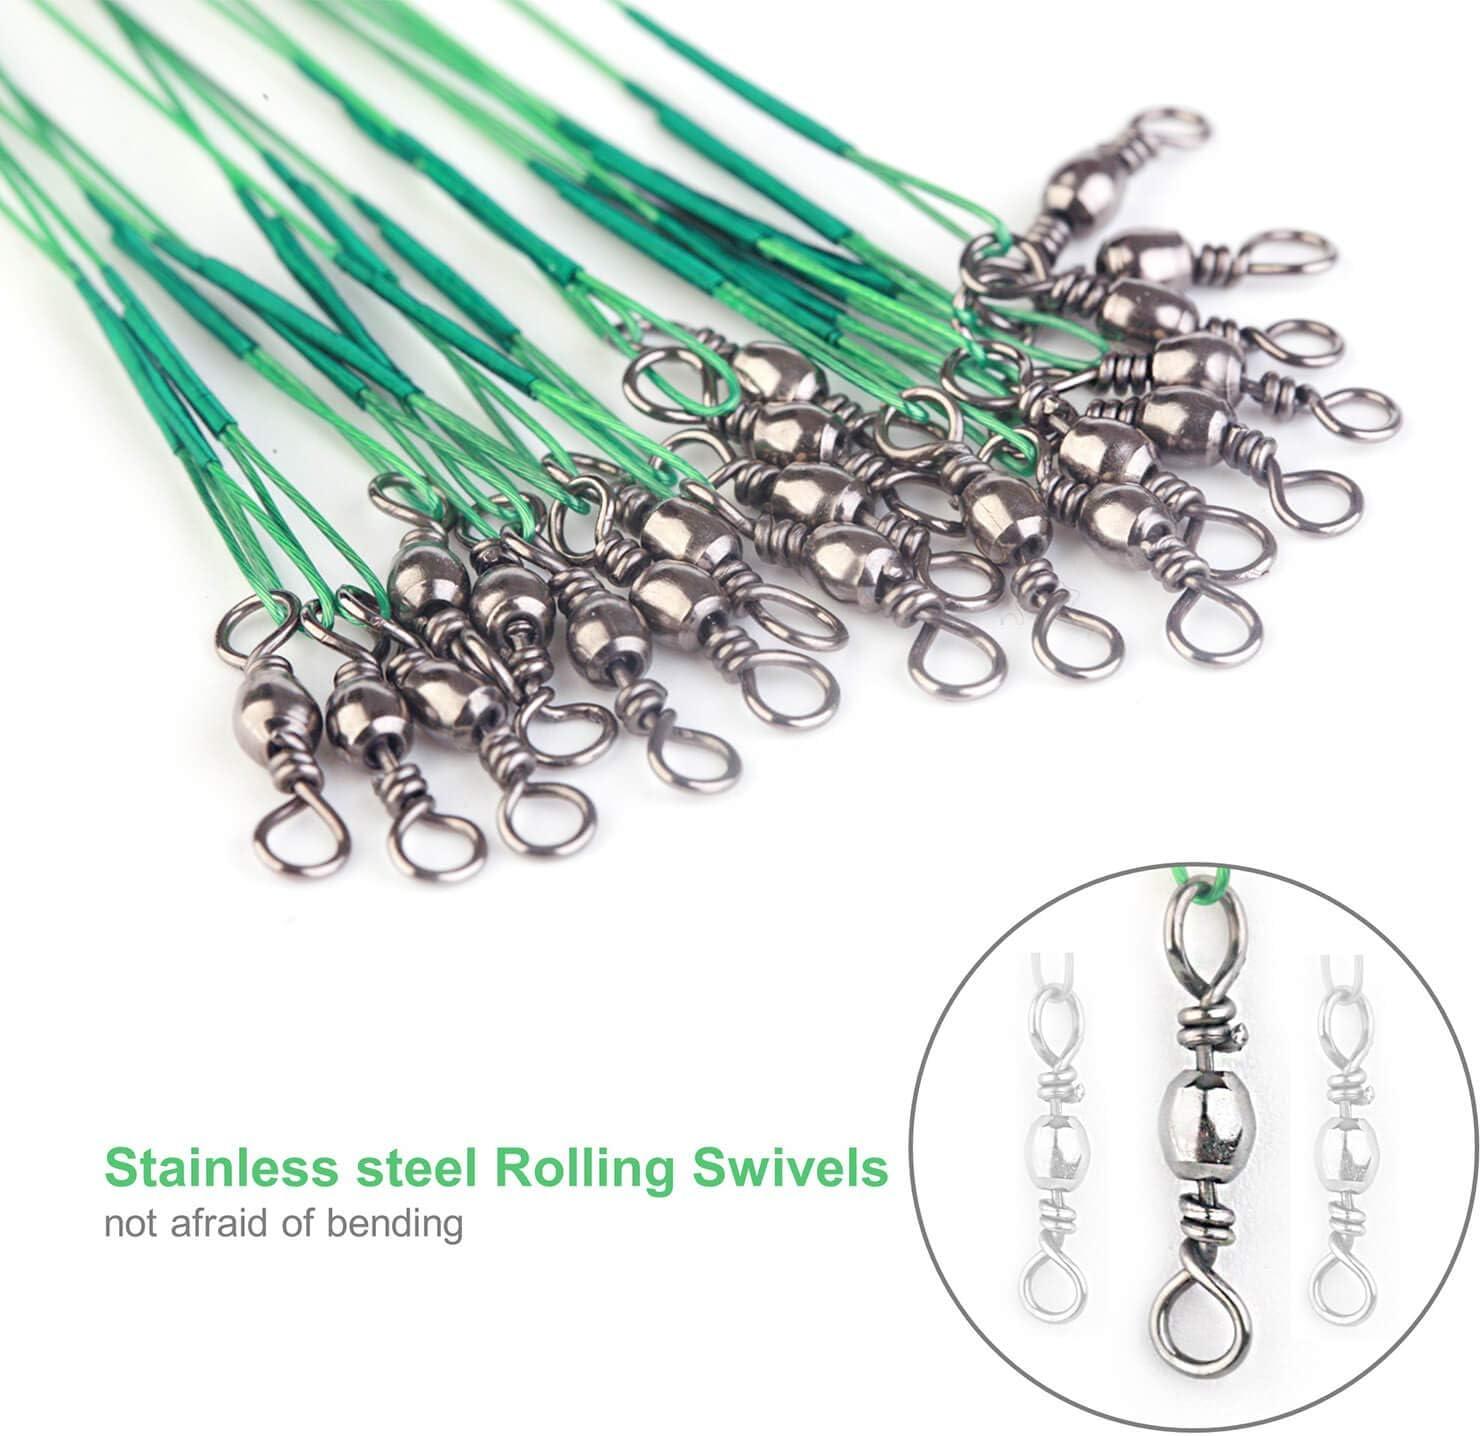 Stainless Steel Fishing Leaders - Pack of 12 Wire Leaders for Fishing  Saltwater, Fishing Wire Leader, Steel Leader - Fishing Leaders with Swivels